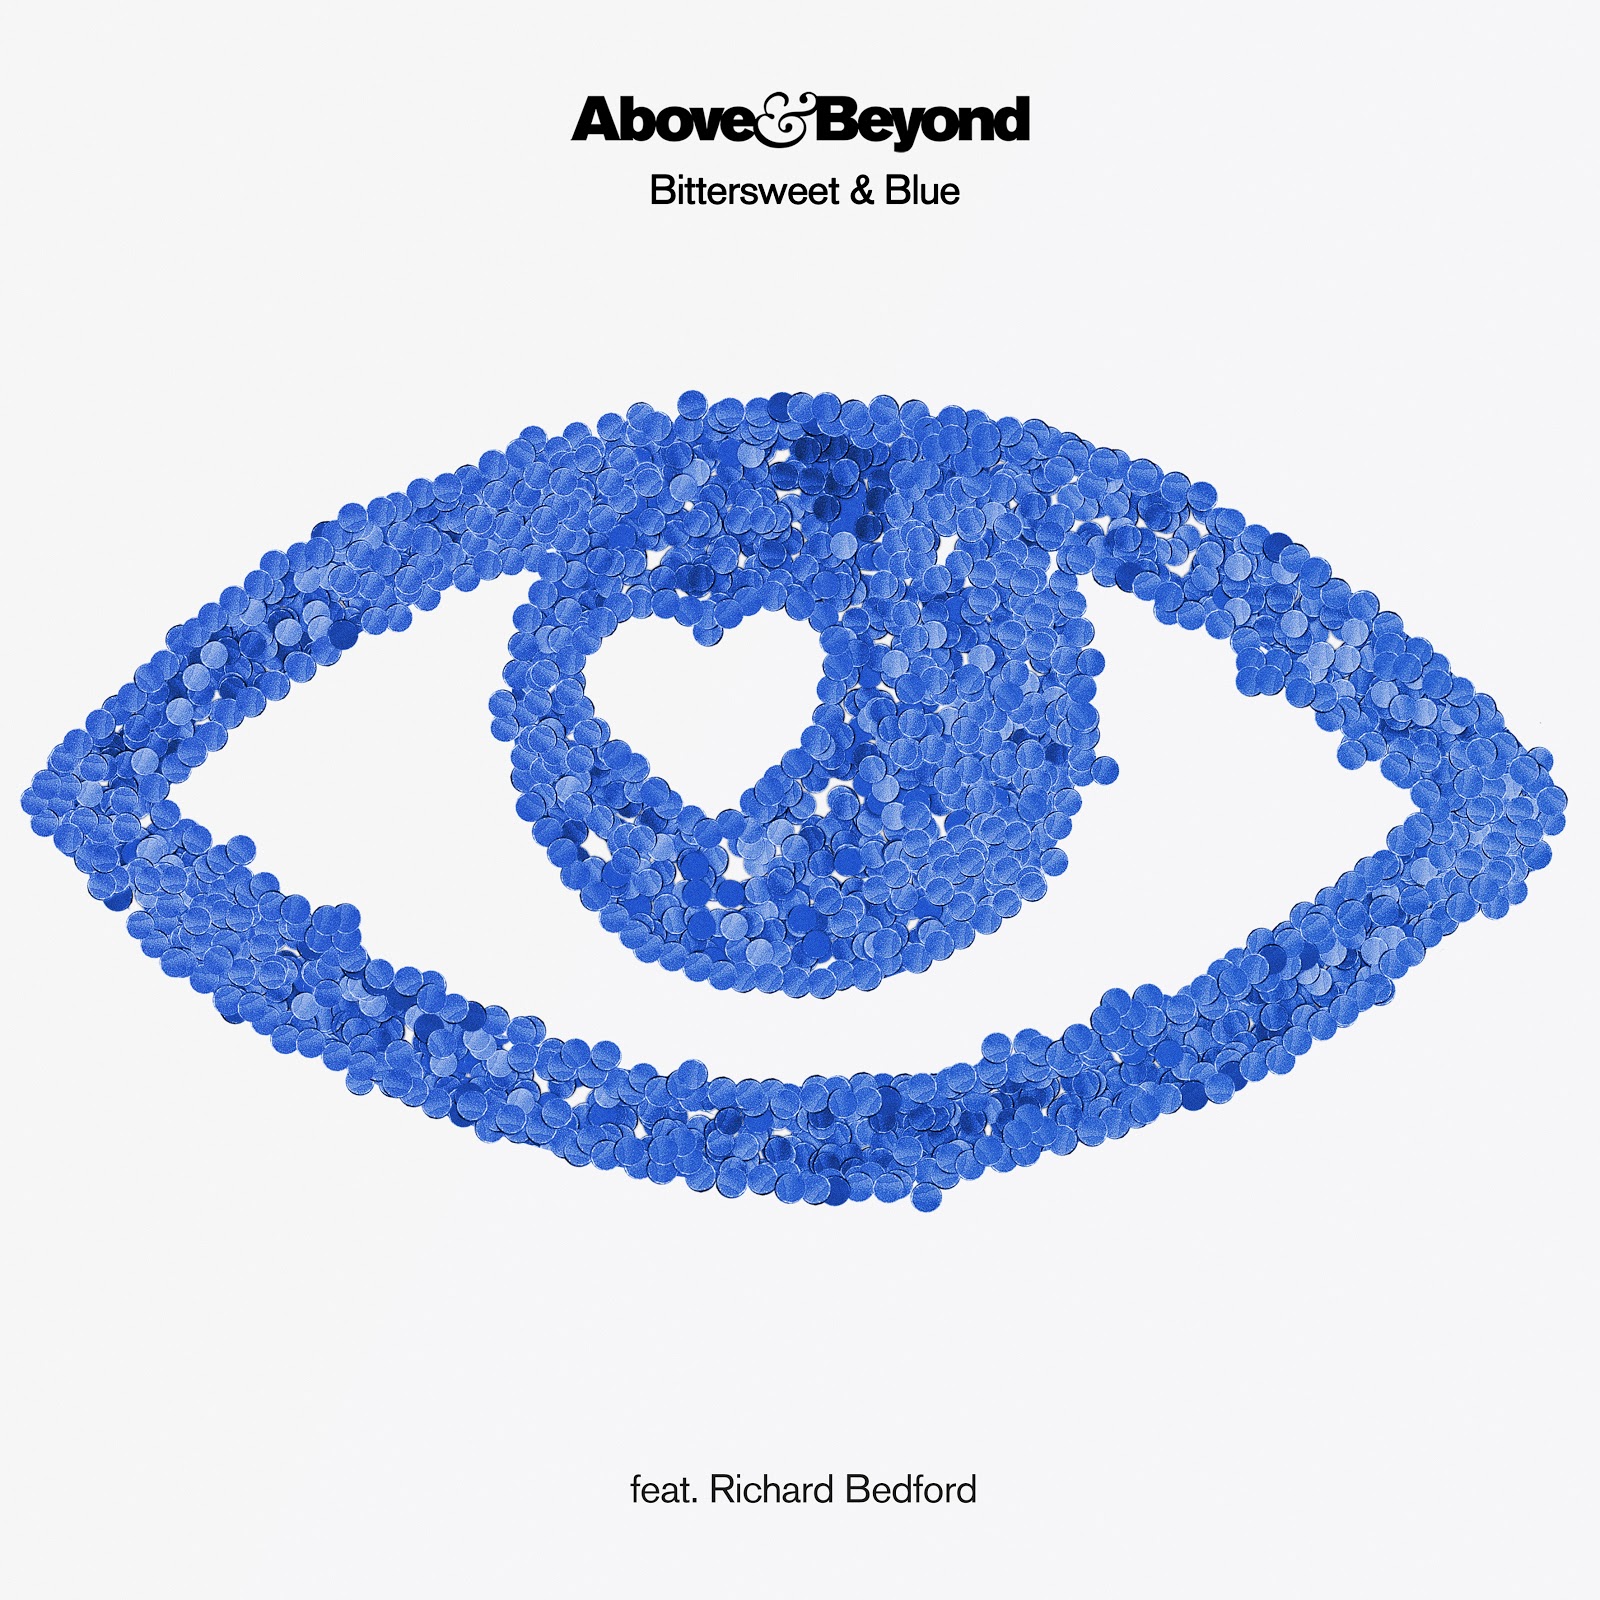 Above and Beyond feat. Richard Bedford presents Bittersweet And Blue (Above and Beyond Club Mix) on Anjunabeats